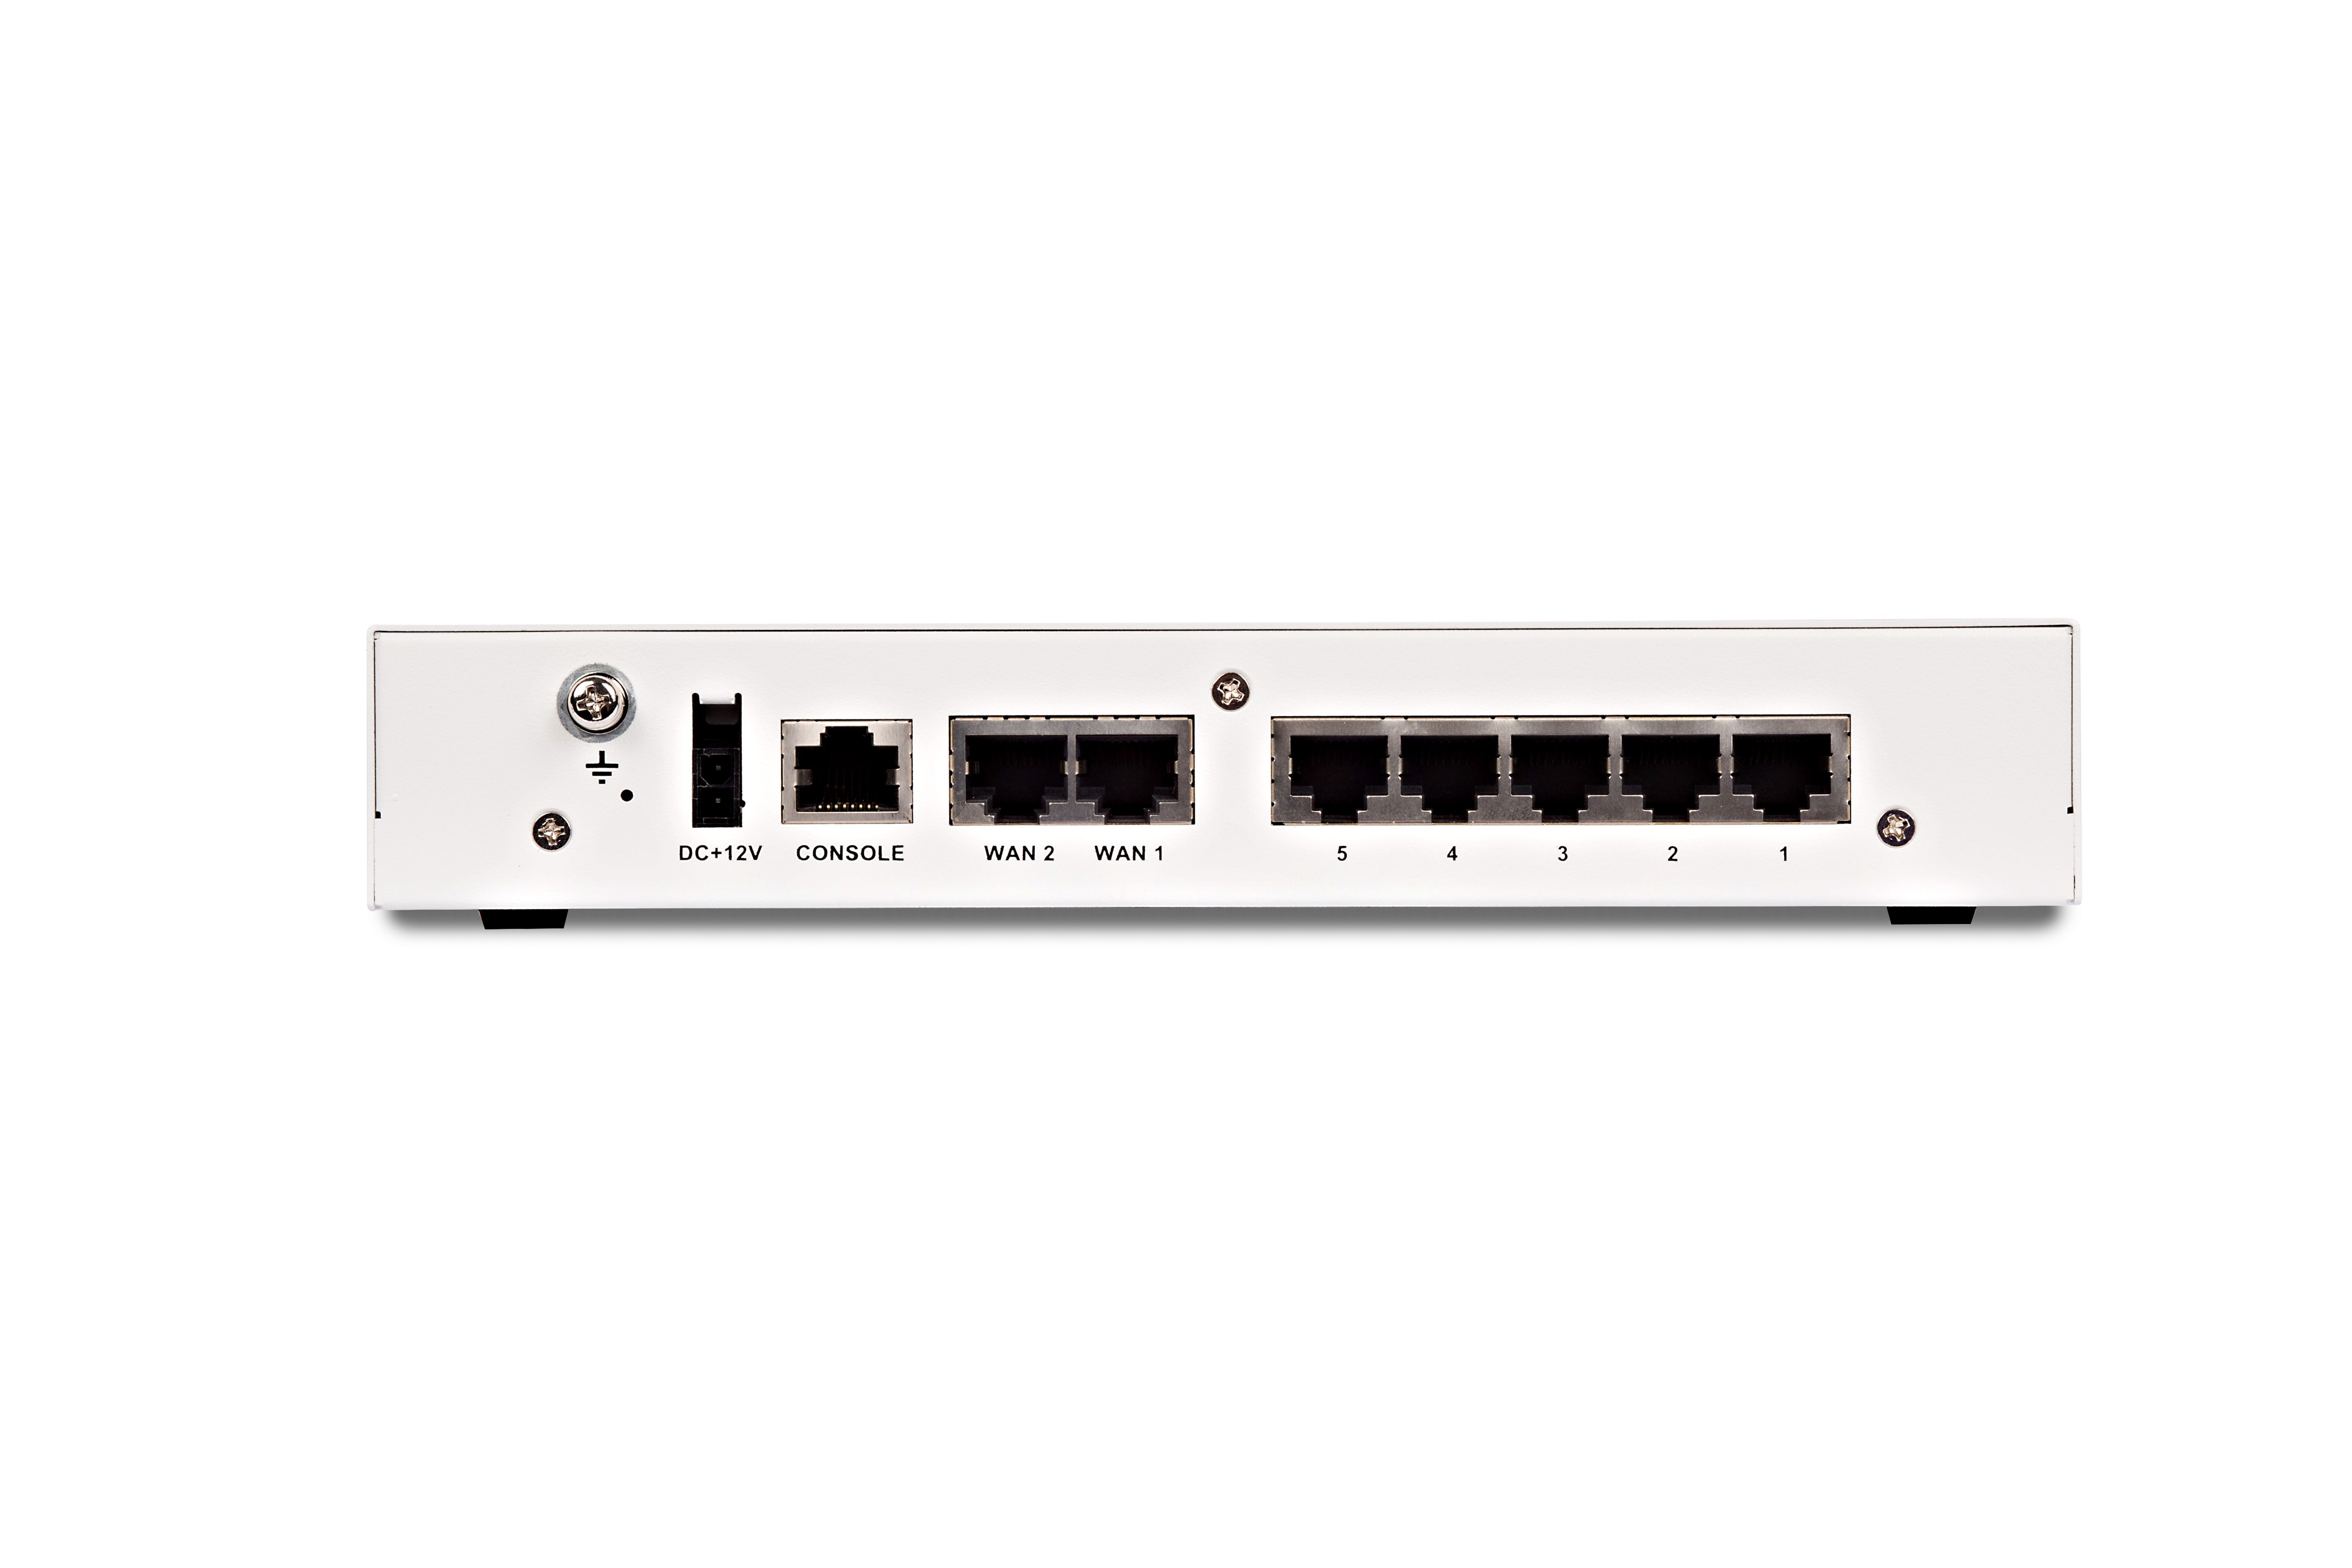 Fortinet FortiGate 51E Firewall (End of Sale/Life)